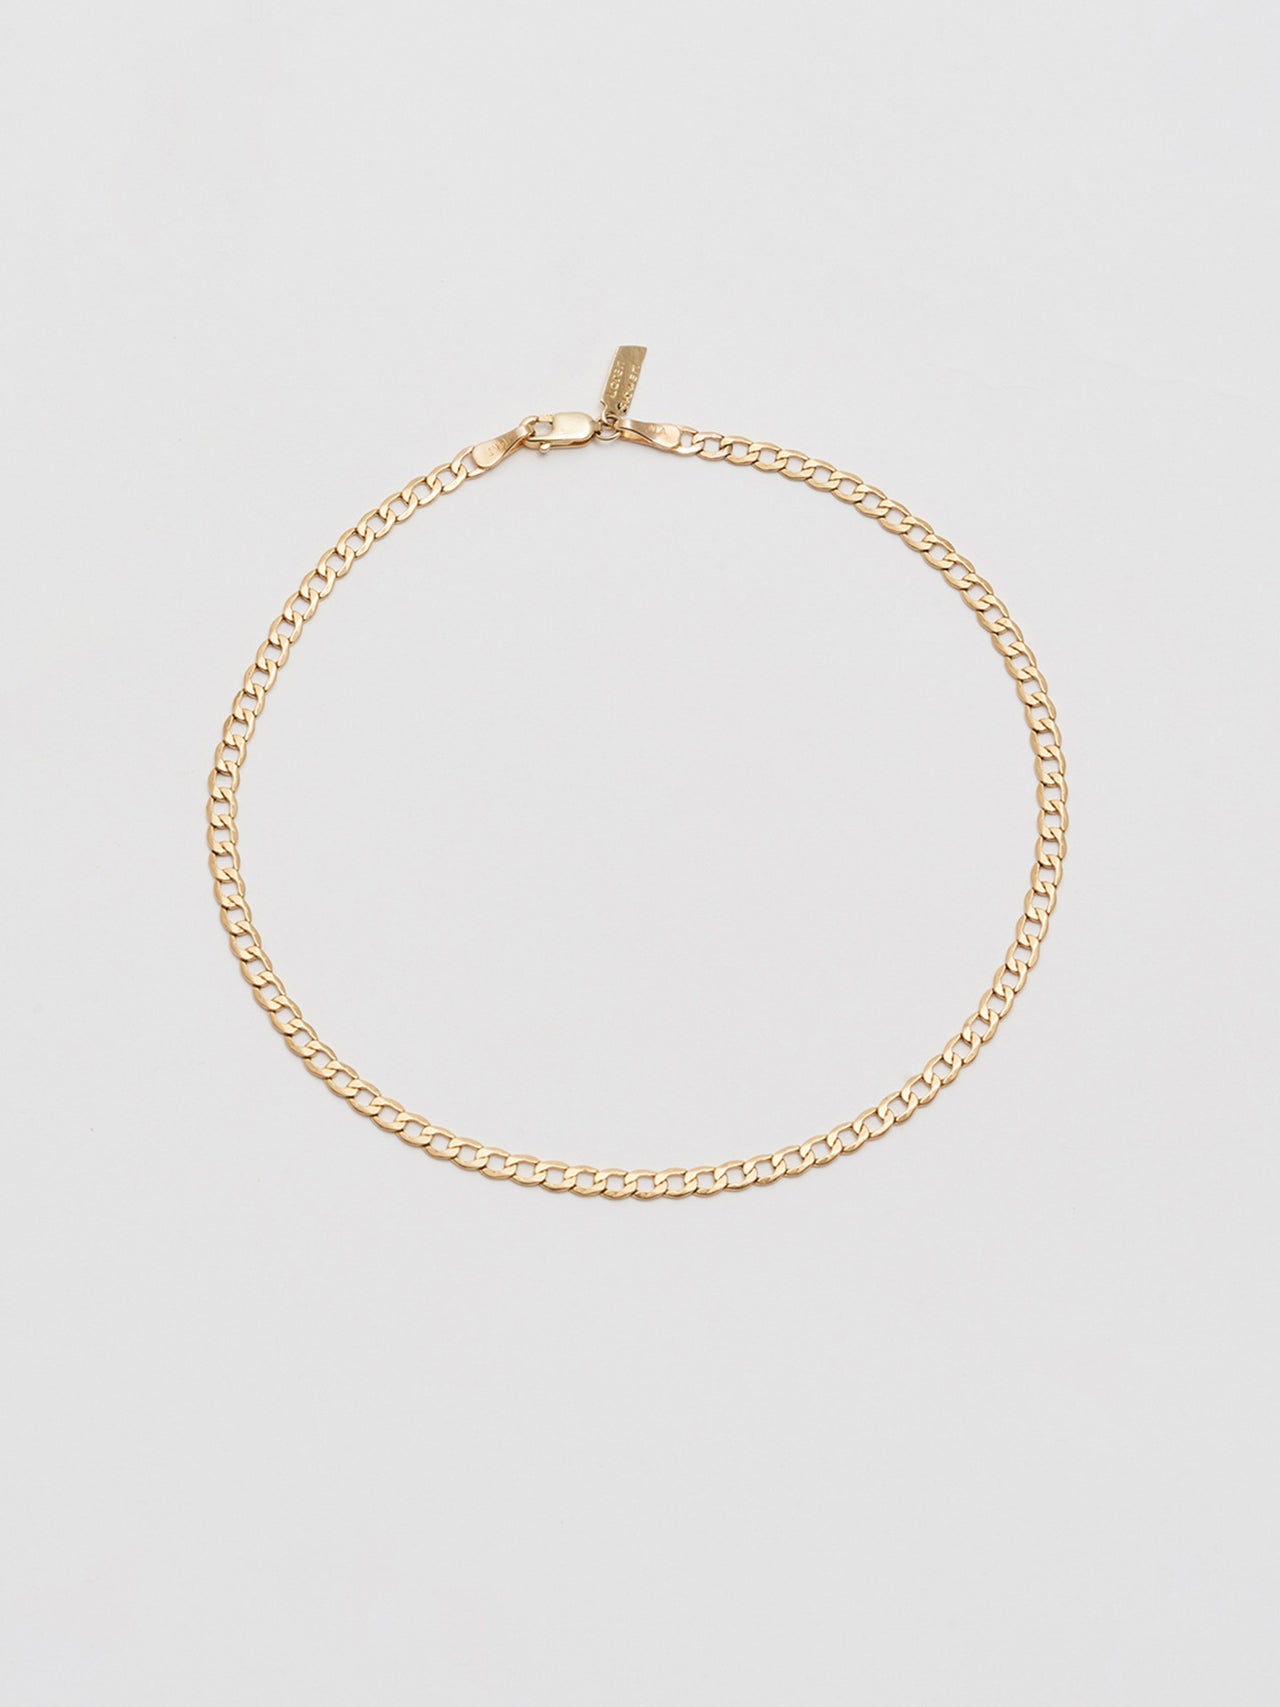 14kt Yellow Gold XL Lightweight Havana Chain Anklet pictured on grey background.